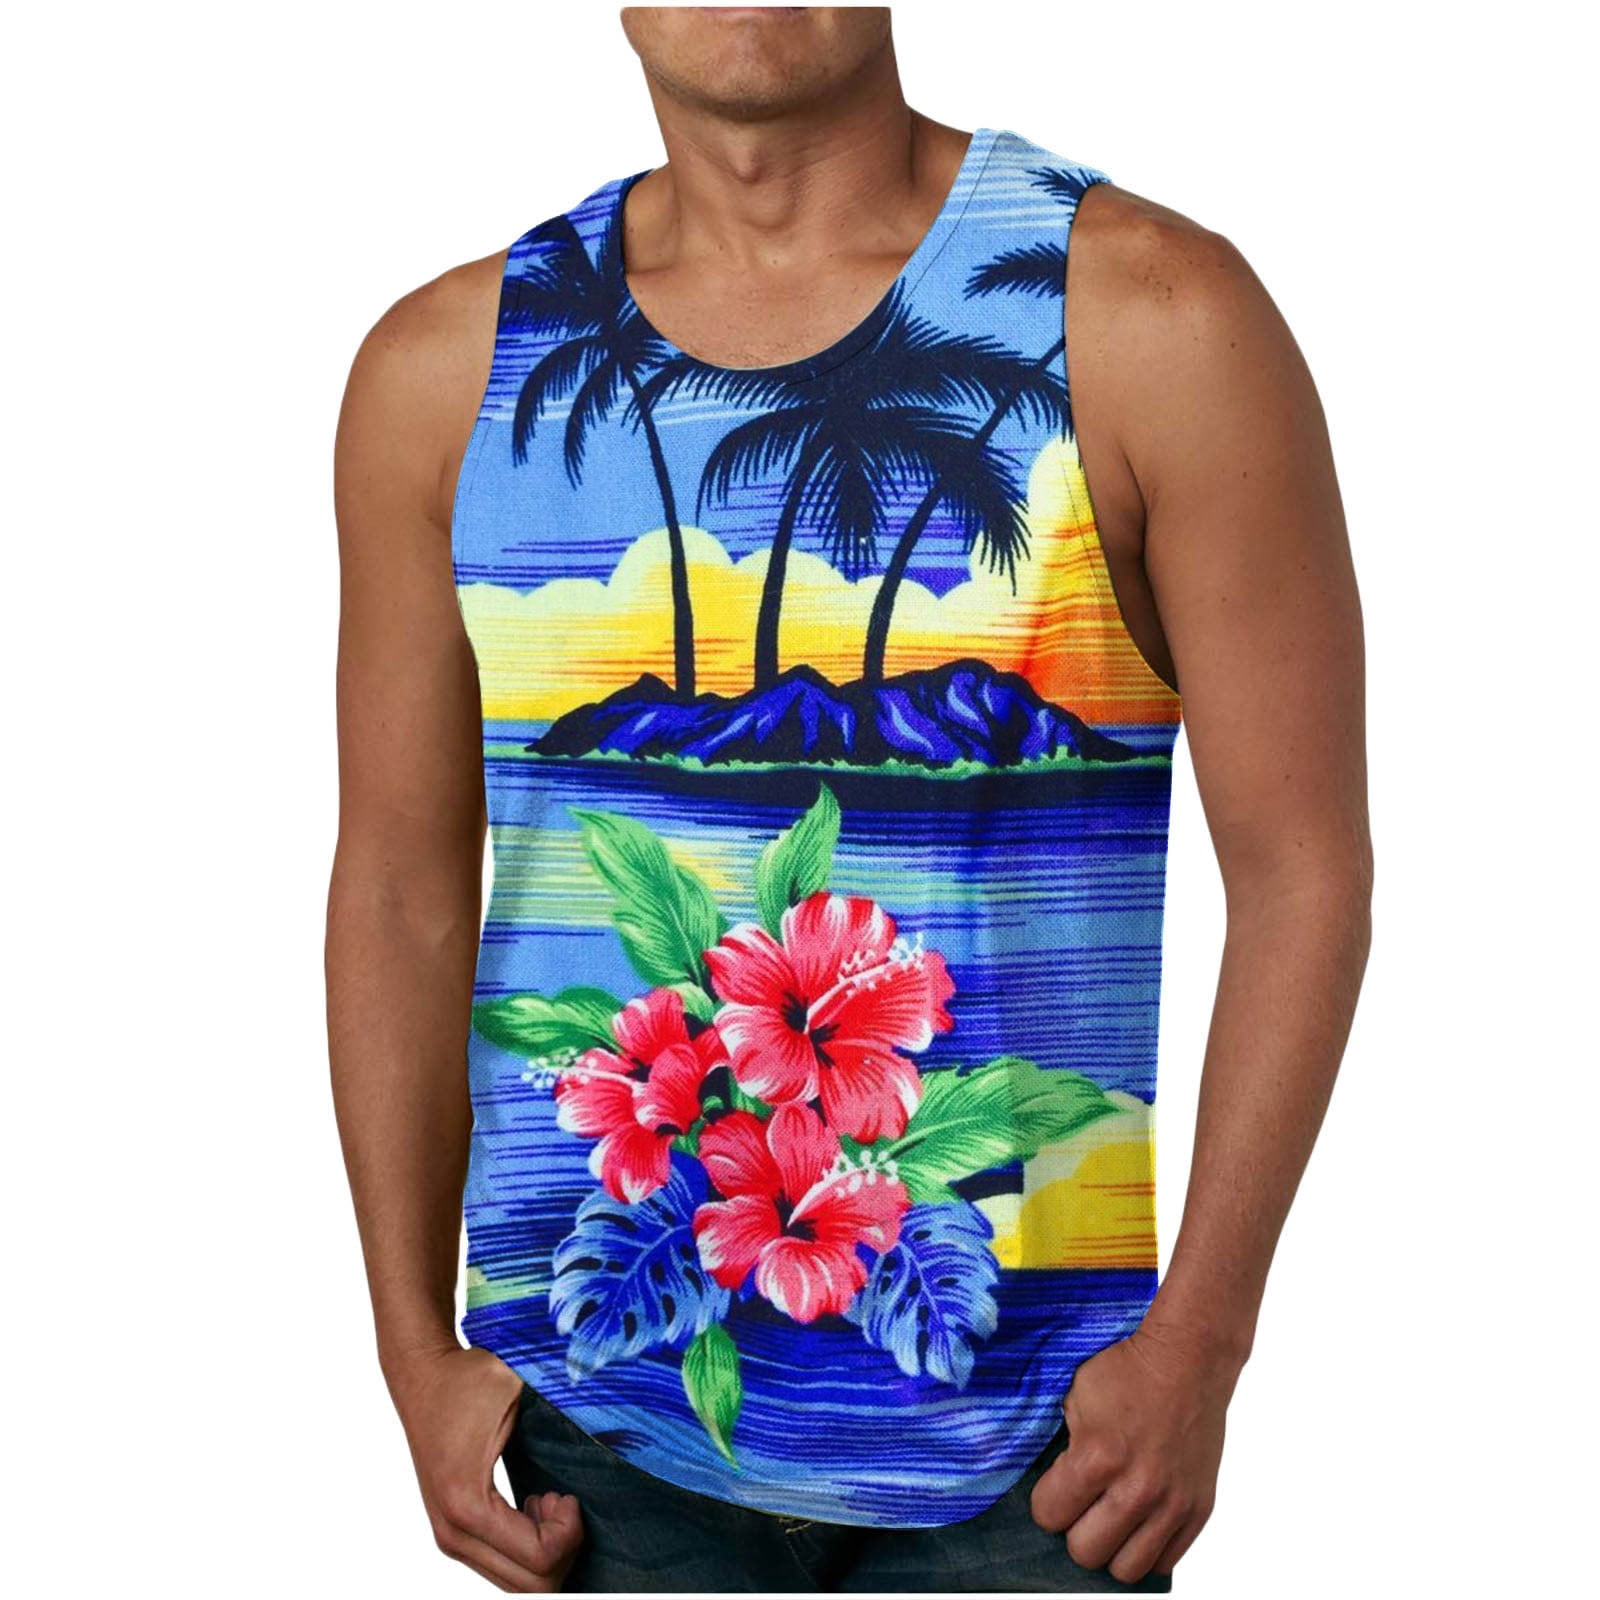 Is That The New Prep Guys Floral Tropical Print Tank Top ??